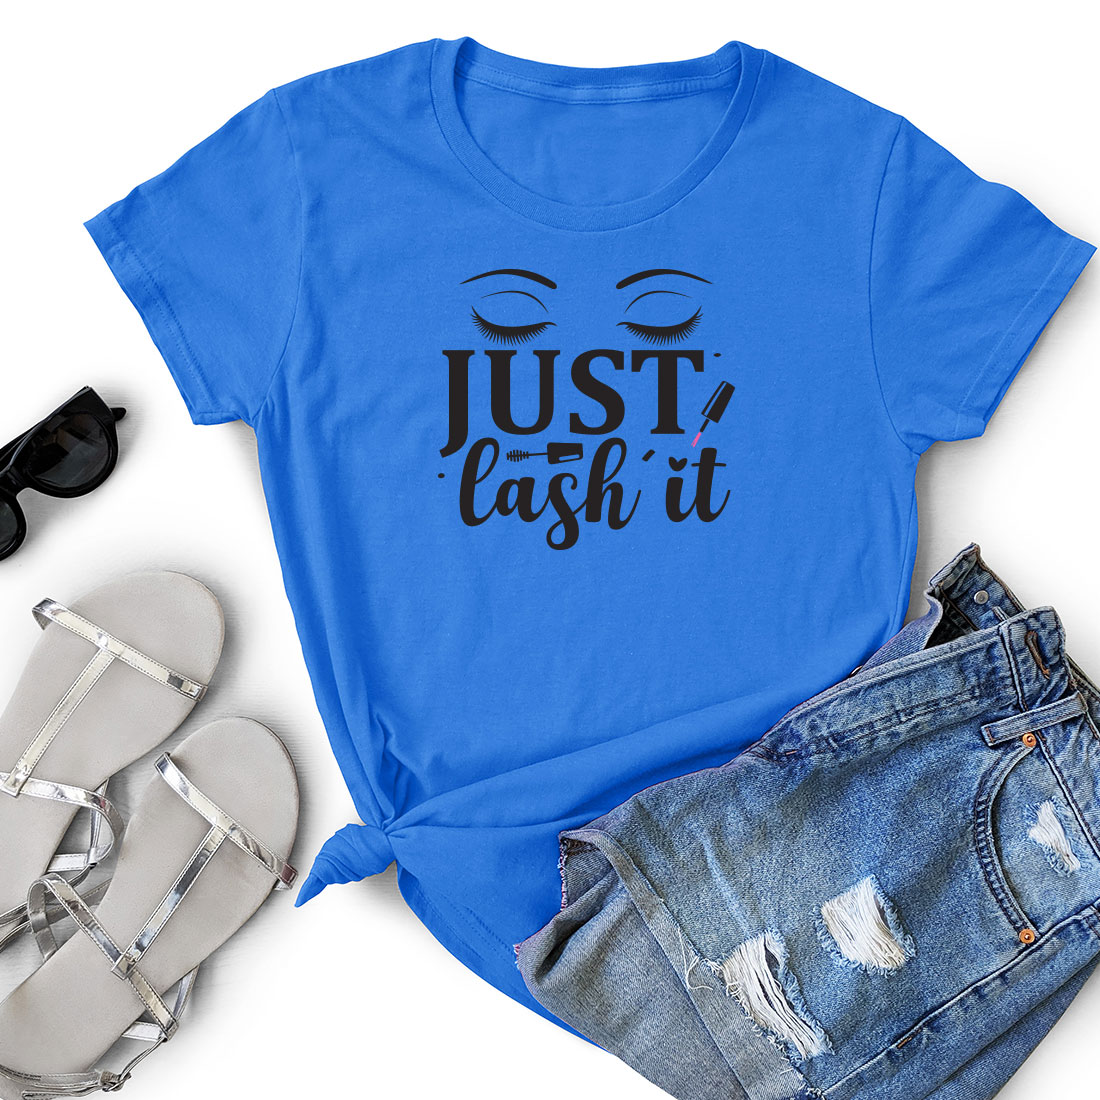 T - shirt that says just cash it next to a pair of shorts.